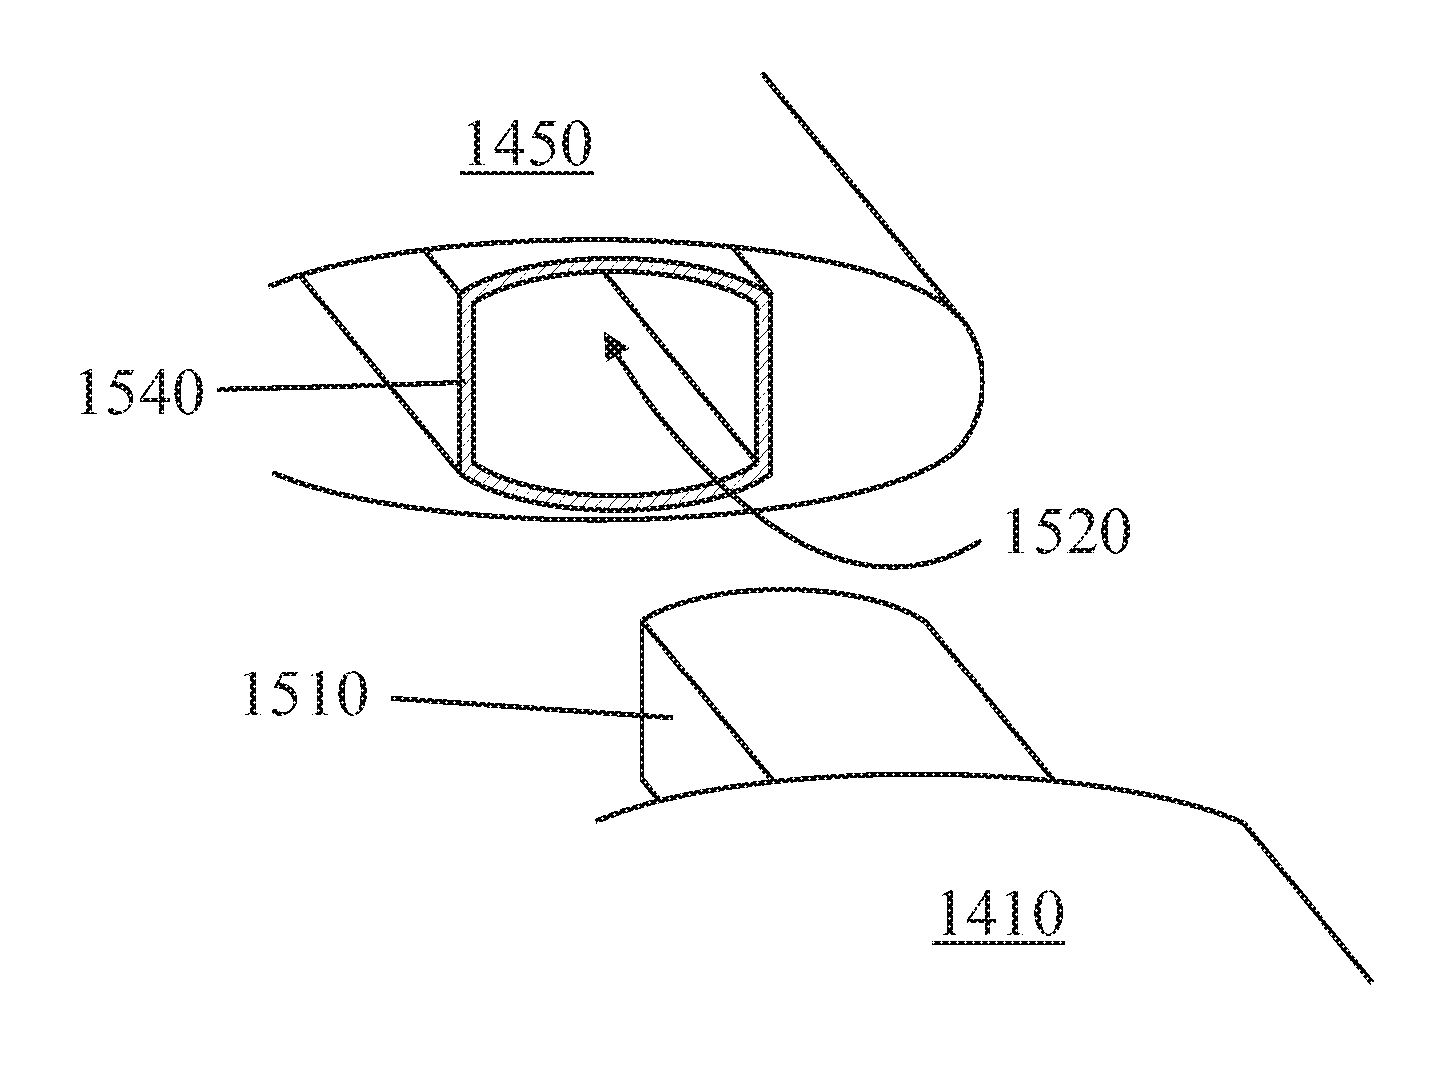 Modular rotor blade for a wind turbine and method for assembling same